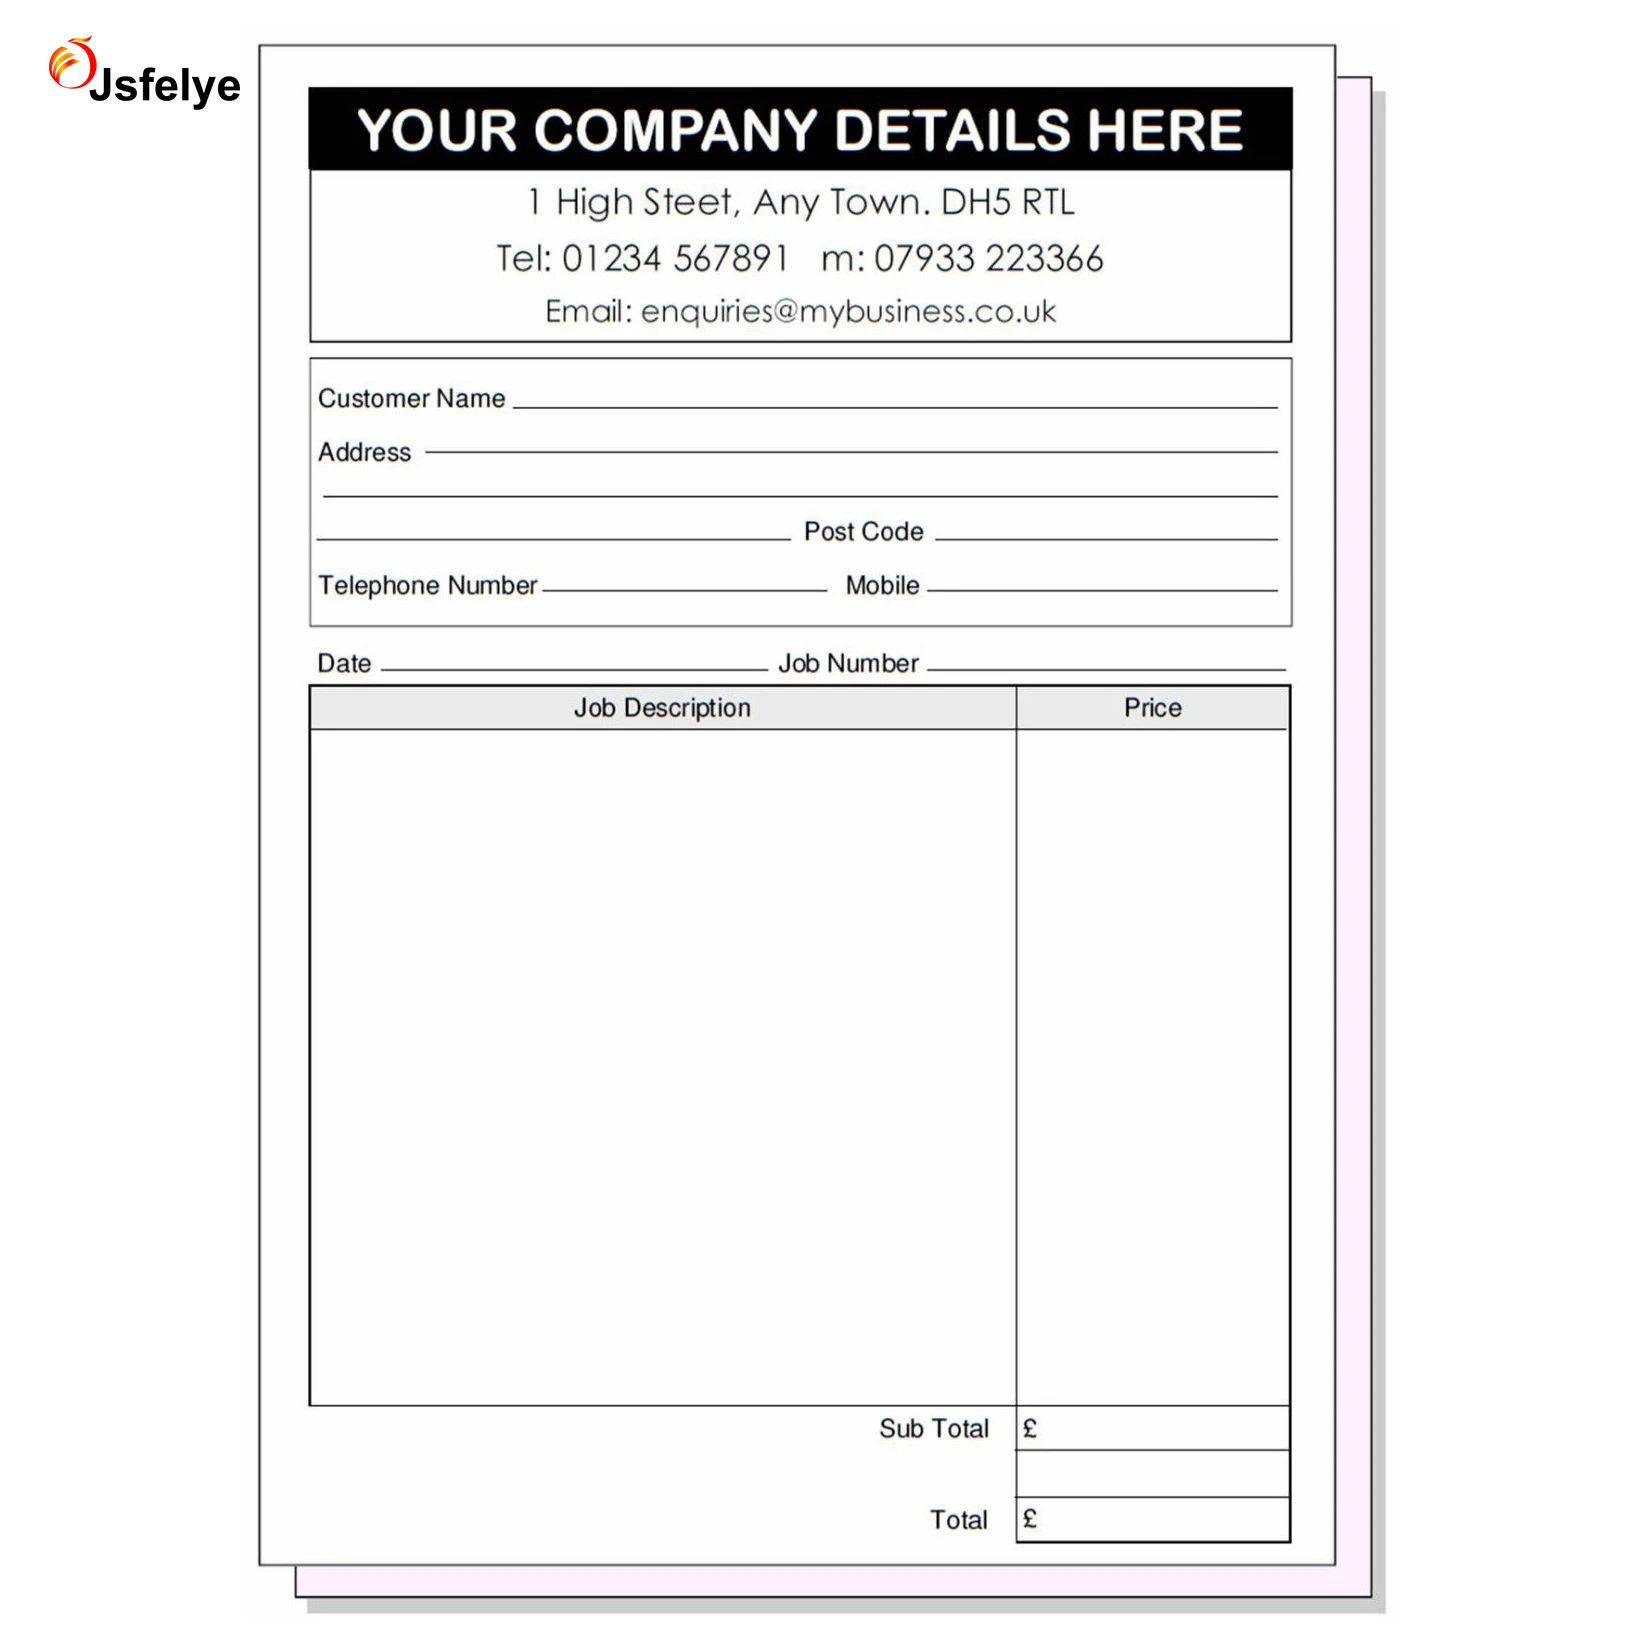 A5 Personalised duplicate invoice/receipt pads 50 sets per pad ANY DESIGN 